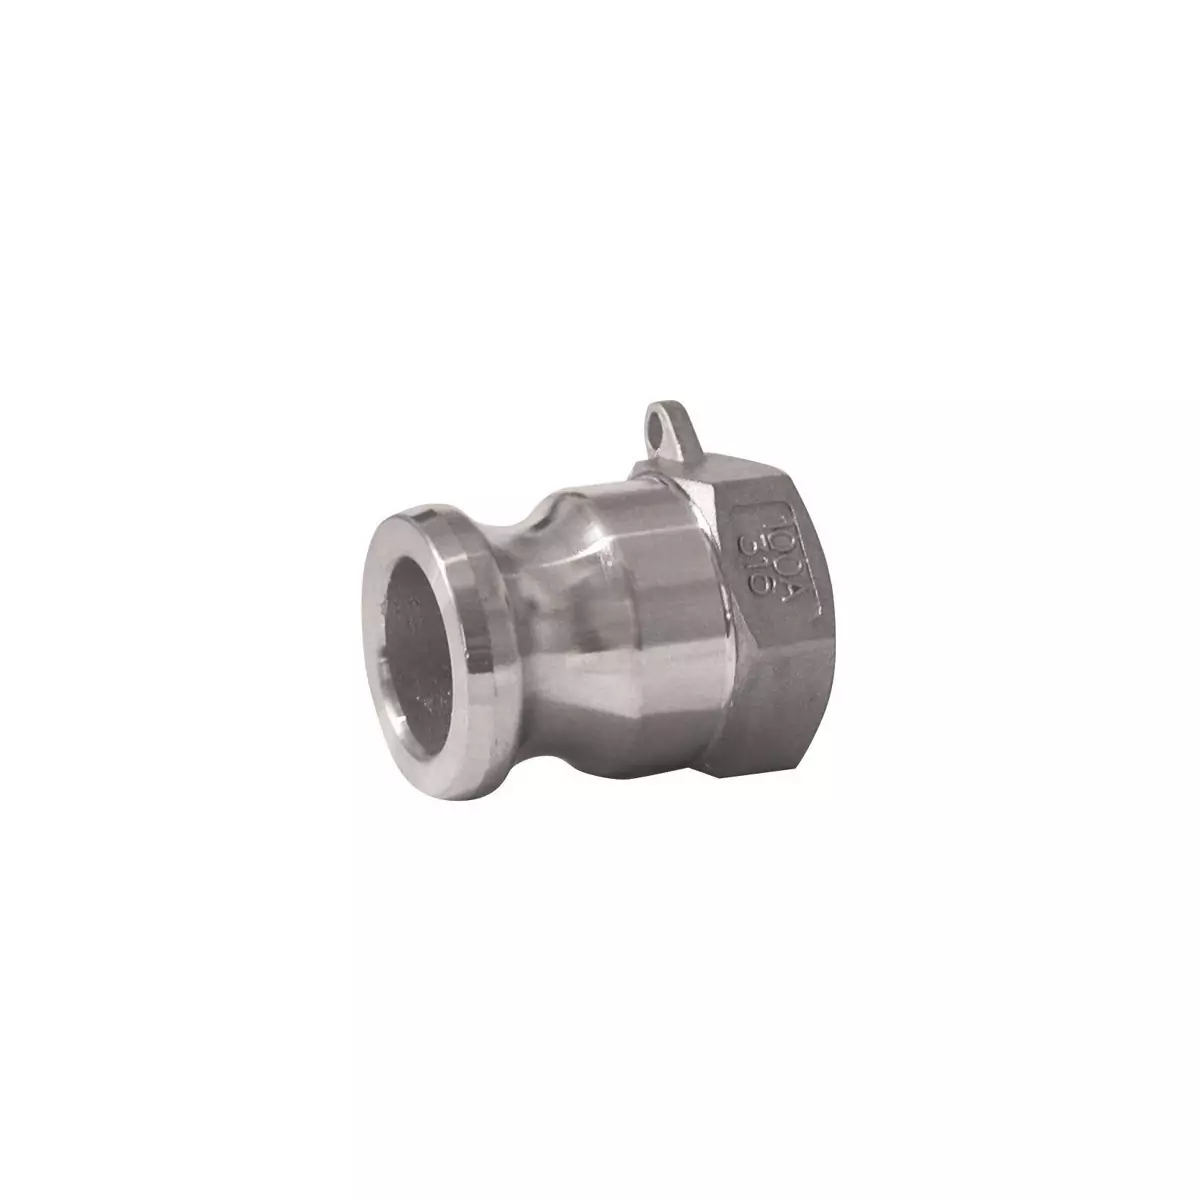 Male Camlock coupling - female threaded stainless steel - Type A